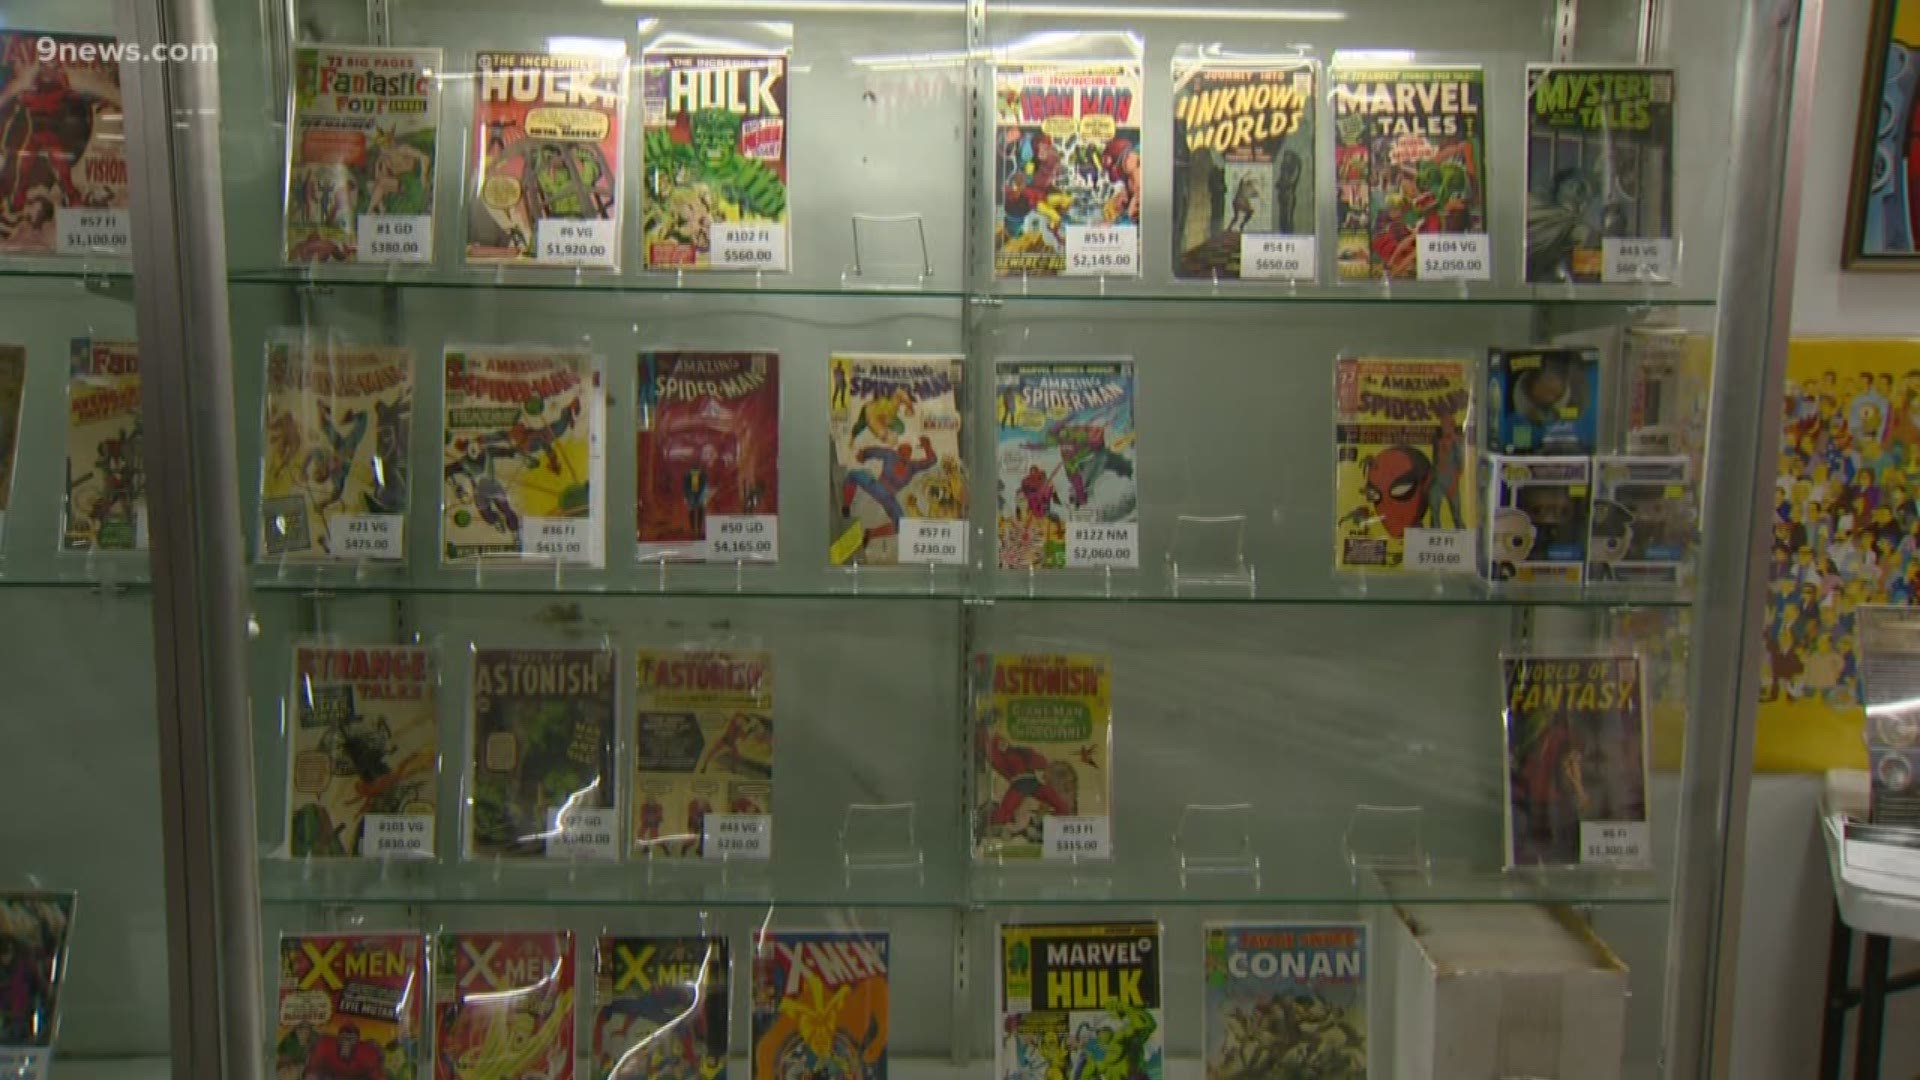 Fourteen comic books worth more than $40,000 were stolen from a store in Denver.